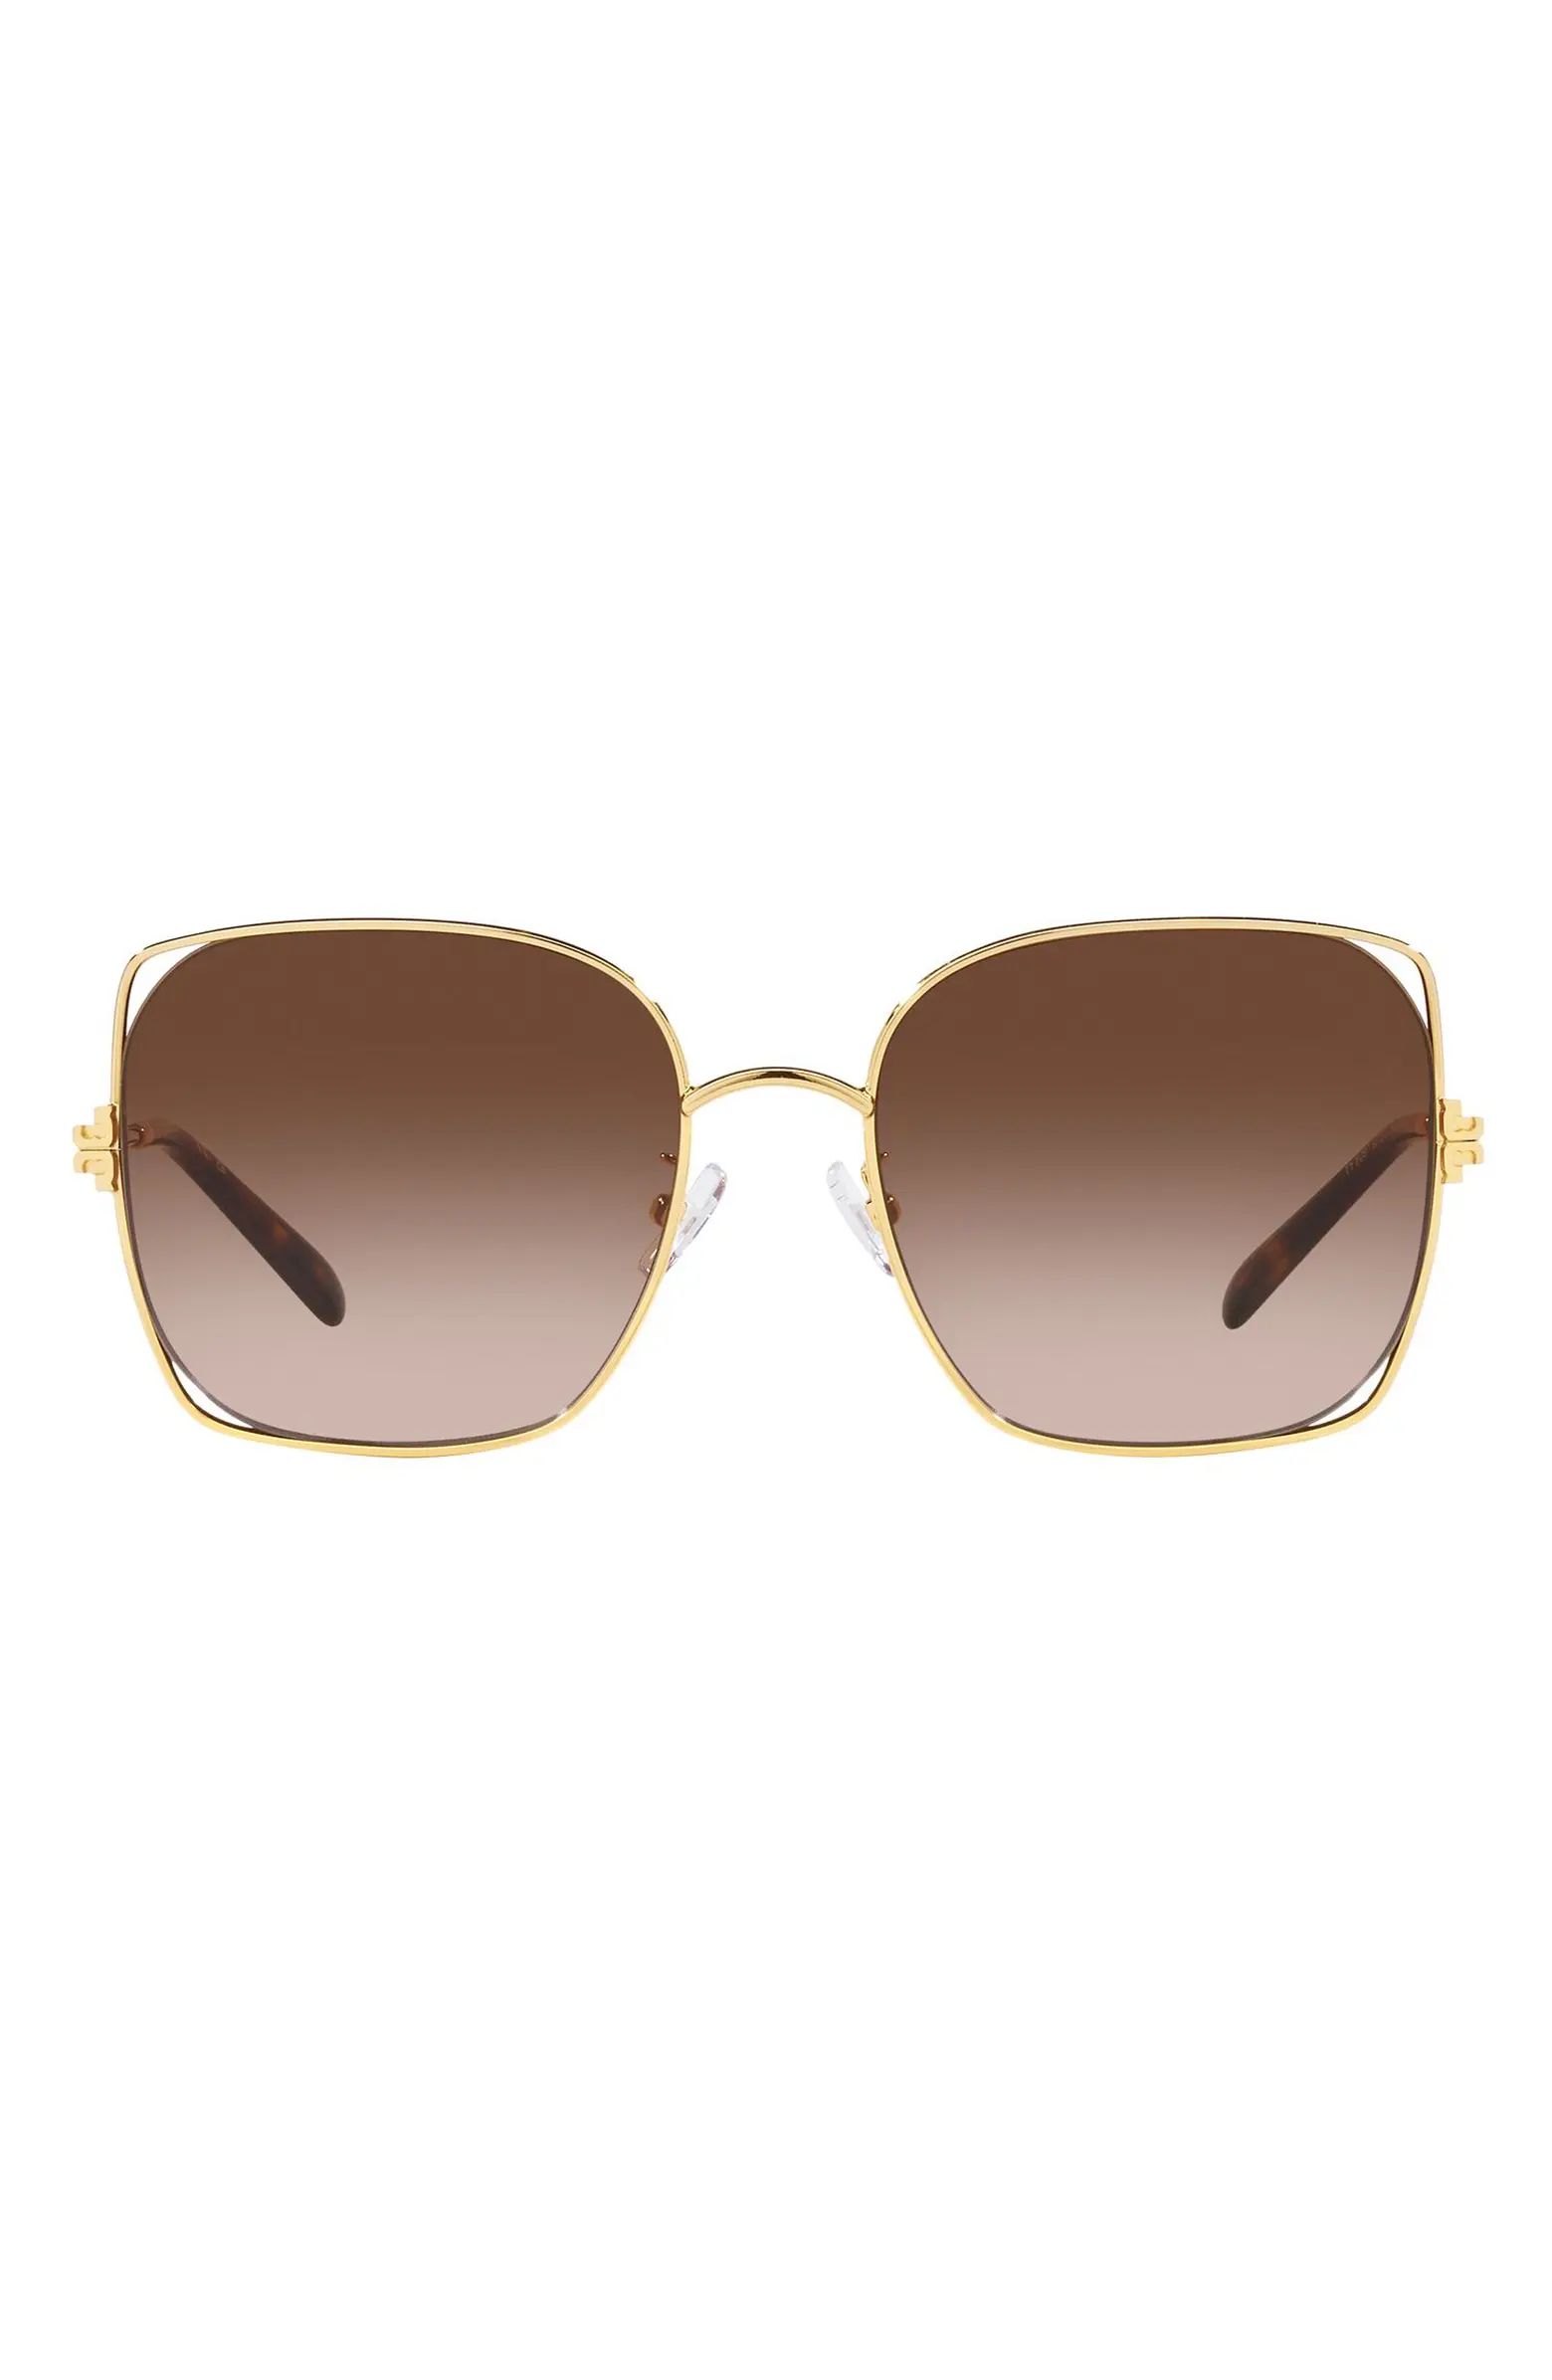 Tory Burch 55mm Square Sunglasses | Nordstrom | Nordstrom